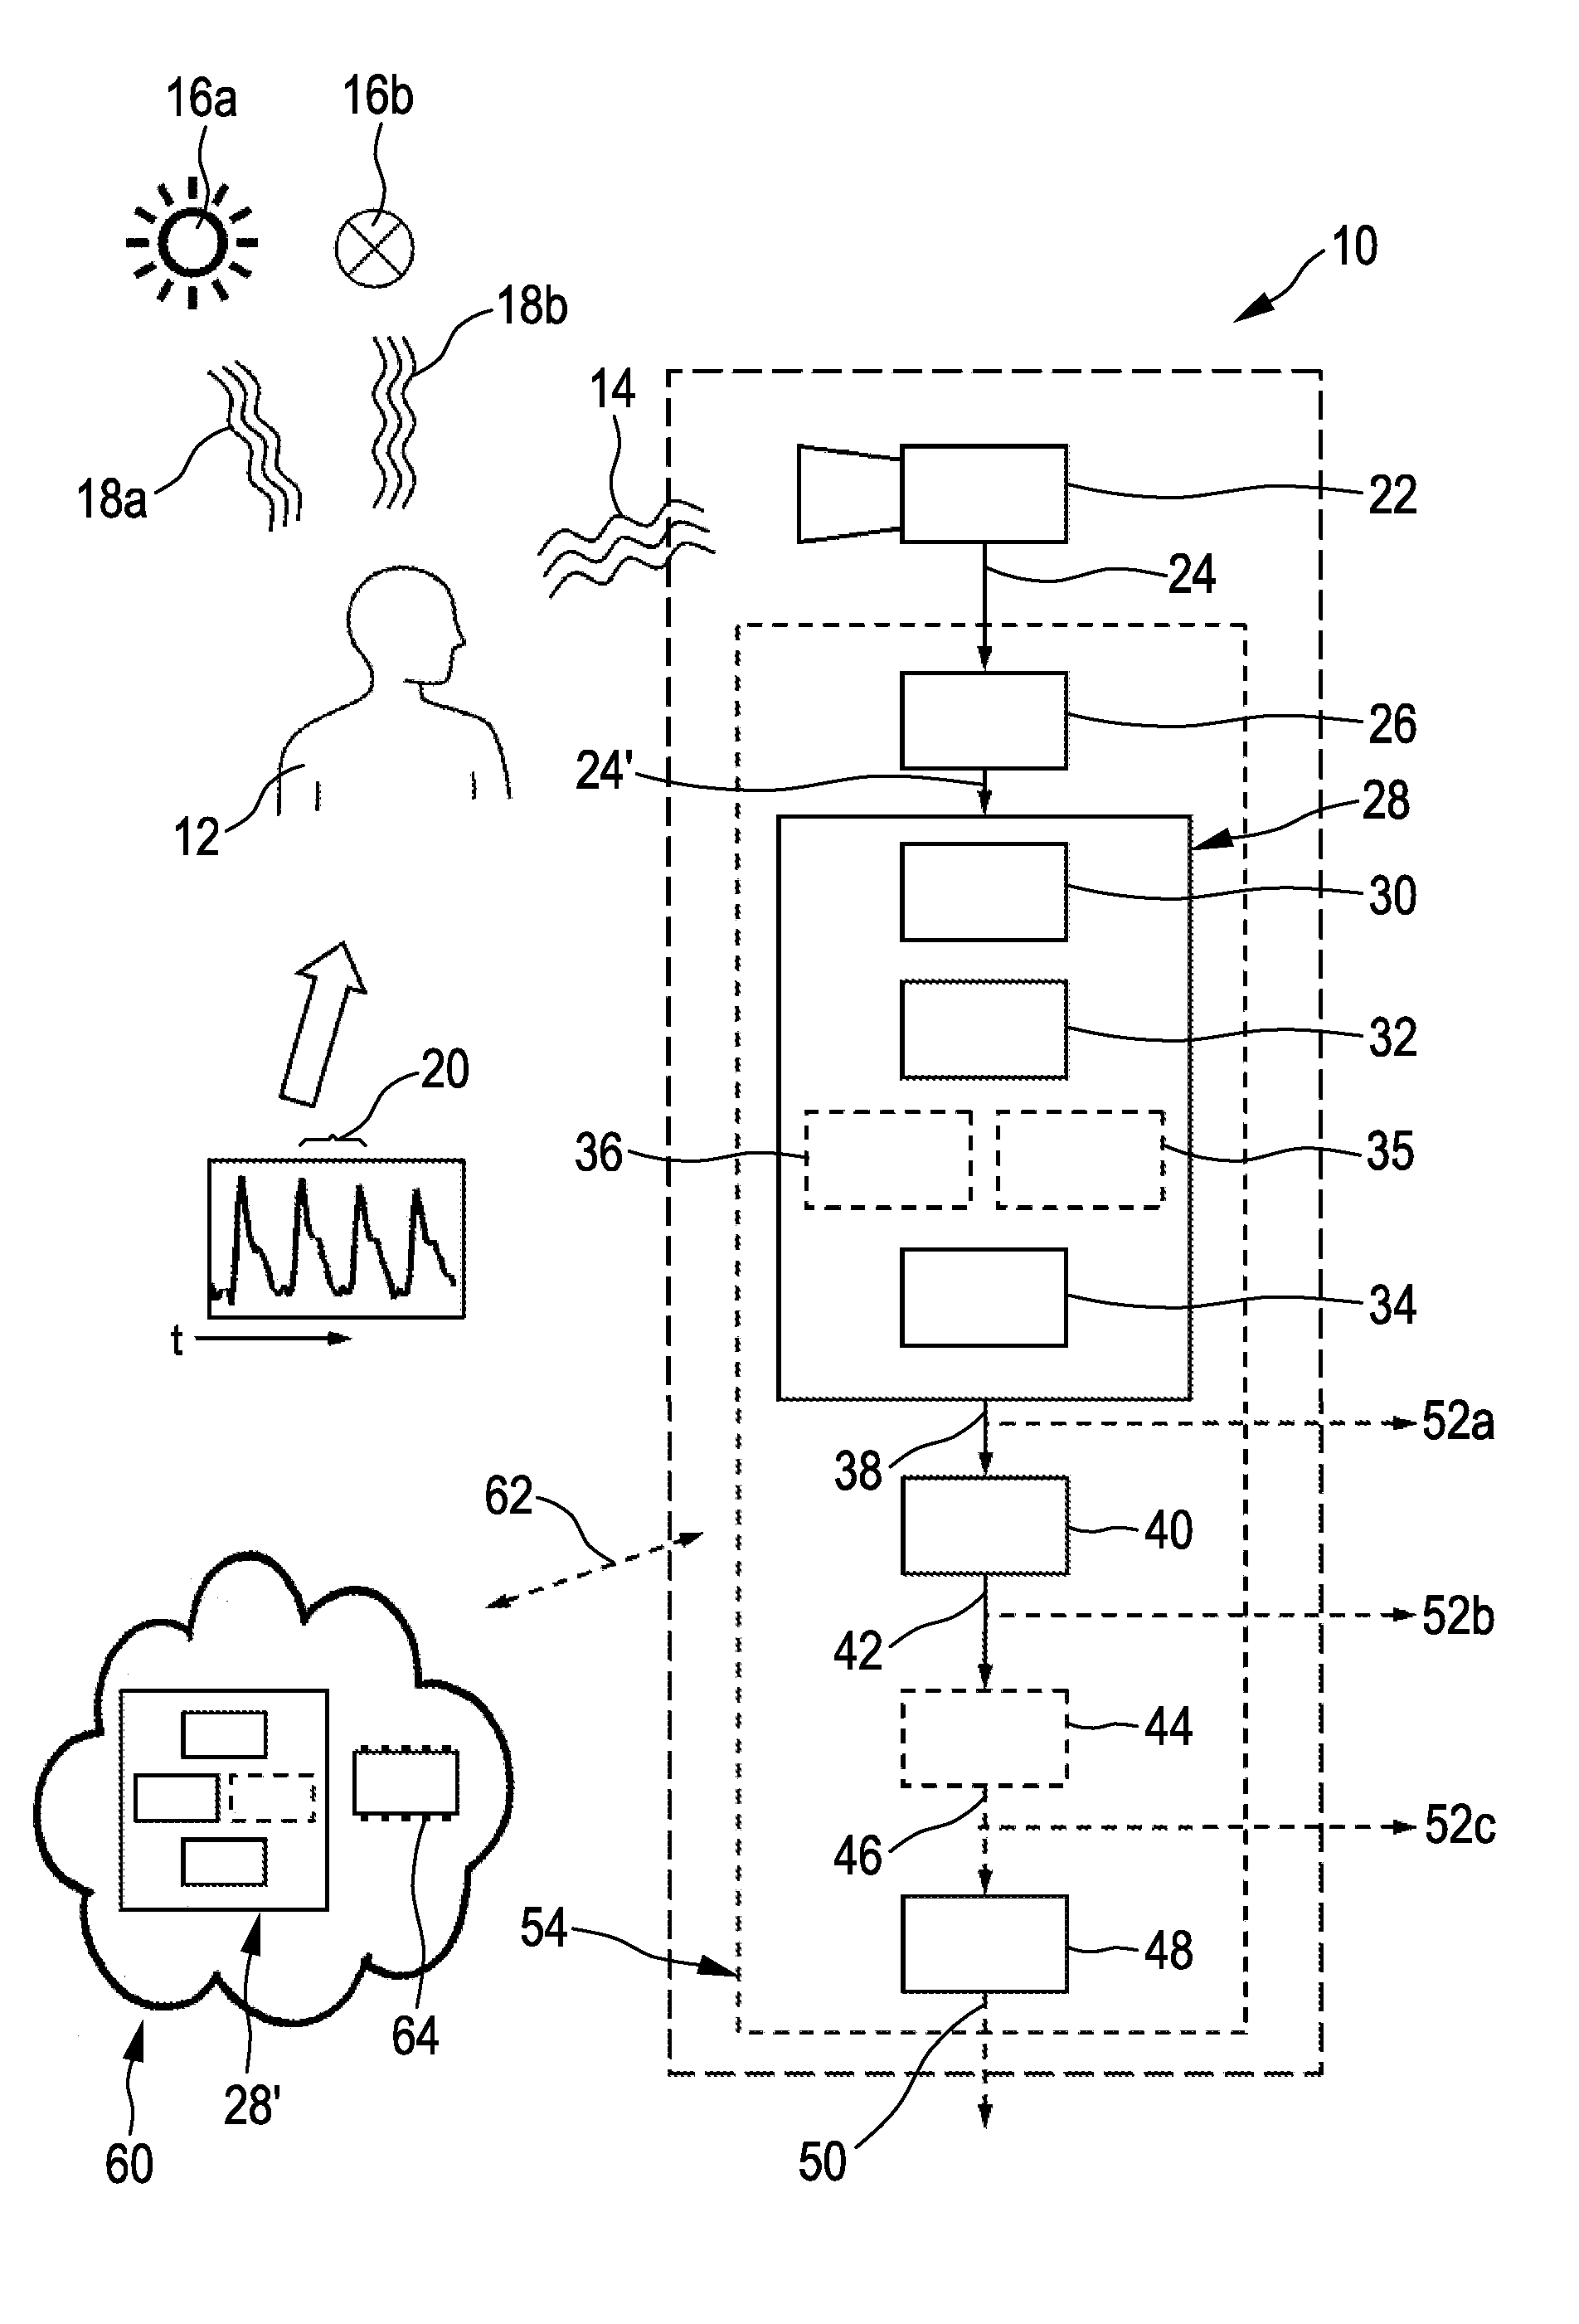 Device and method for extracting information from remotely detected characteristic signals